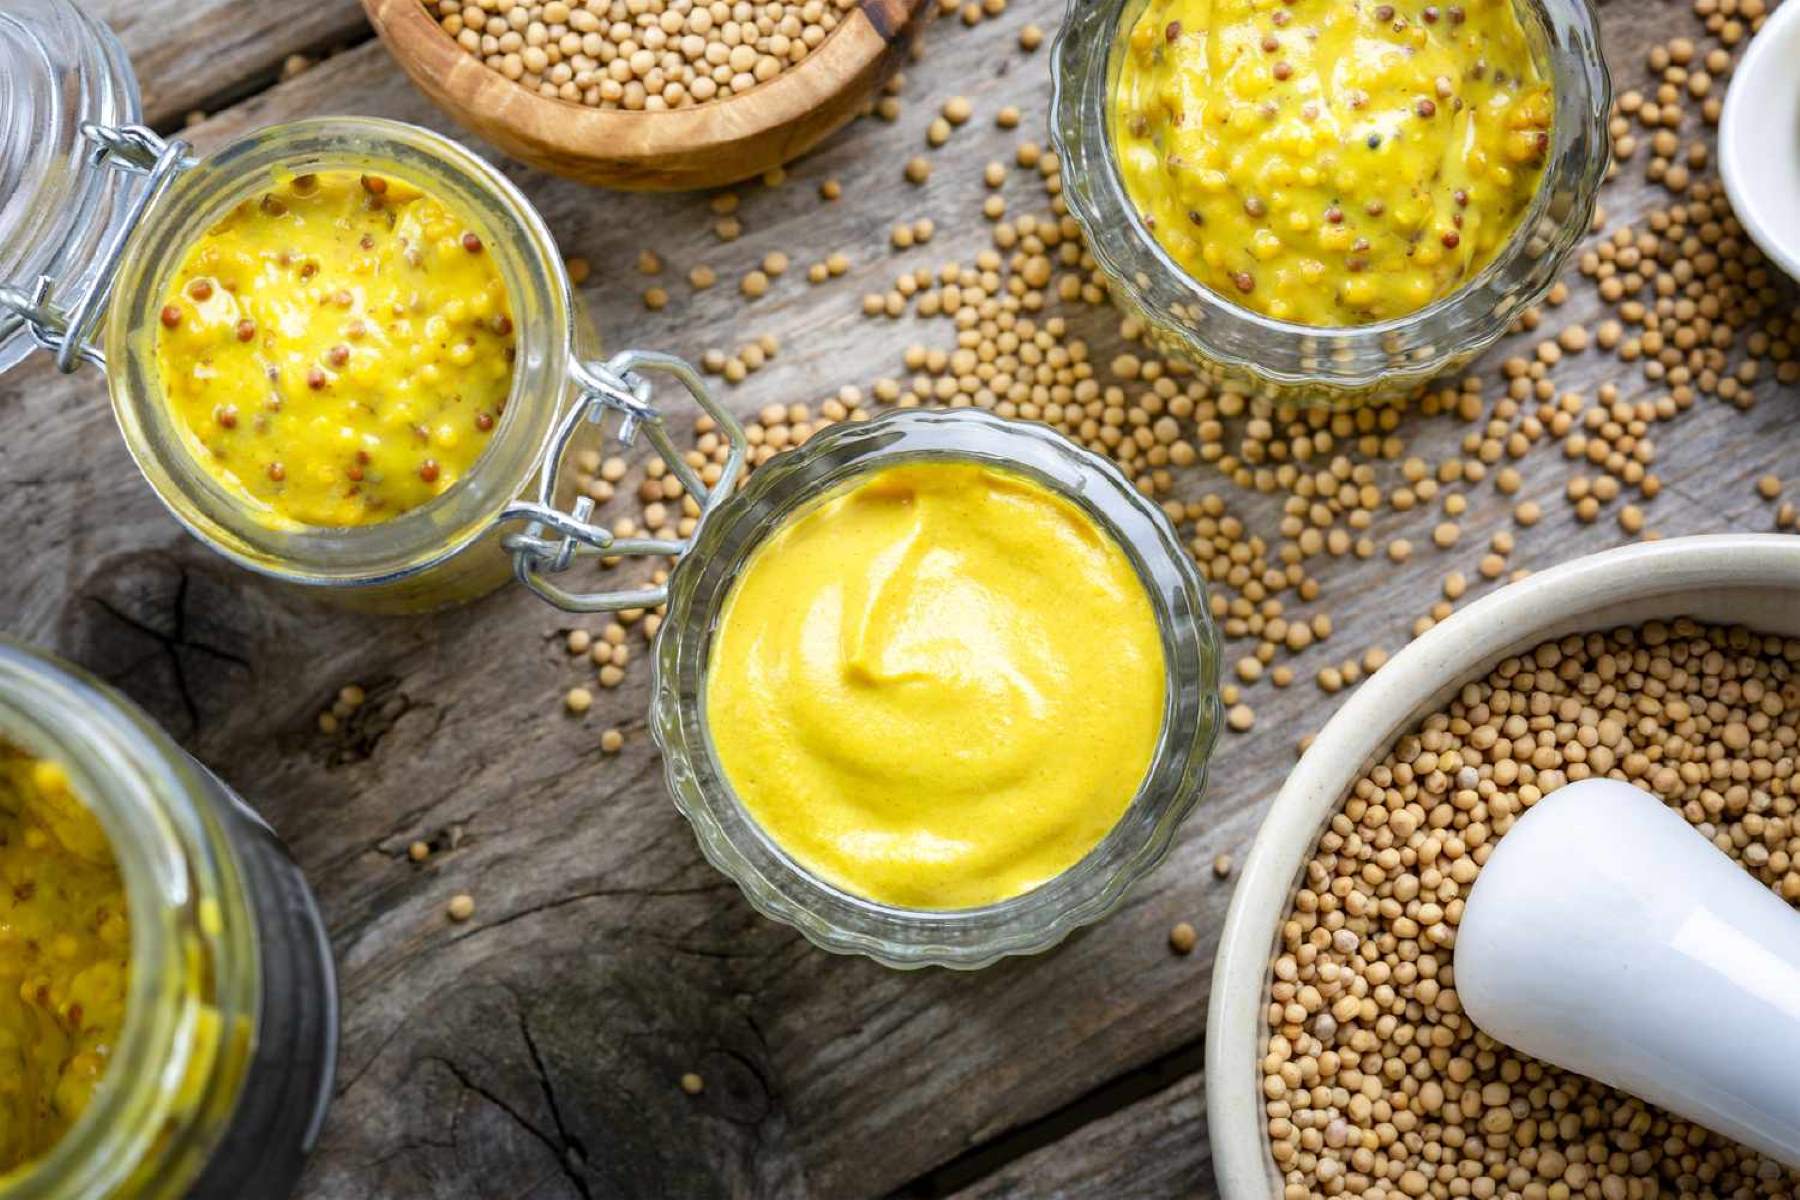 Spice Up Your Yellow Mustard With These Creative Additions!